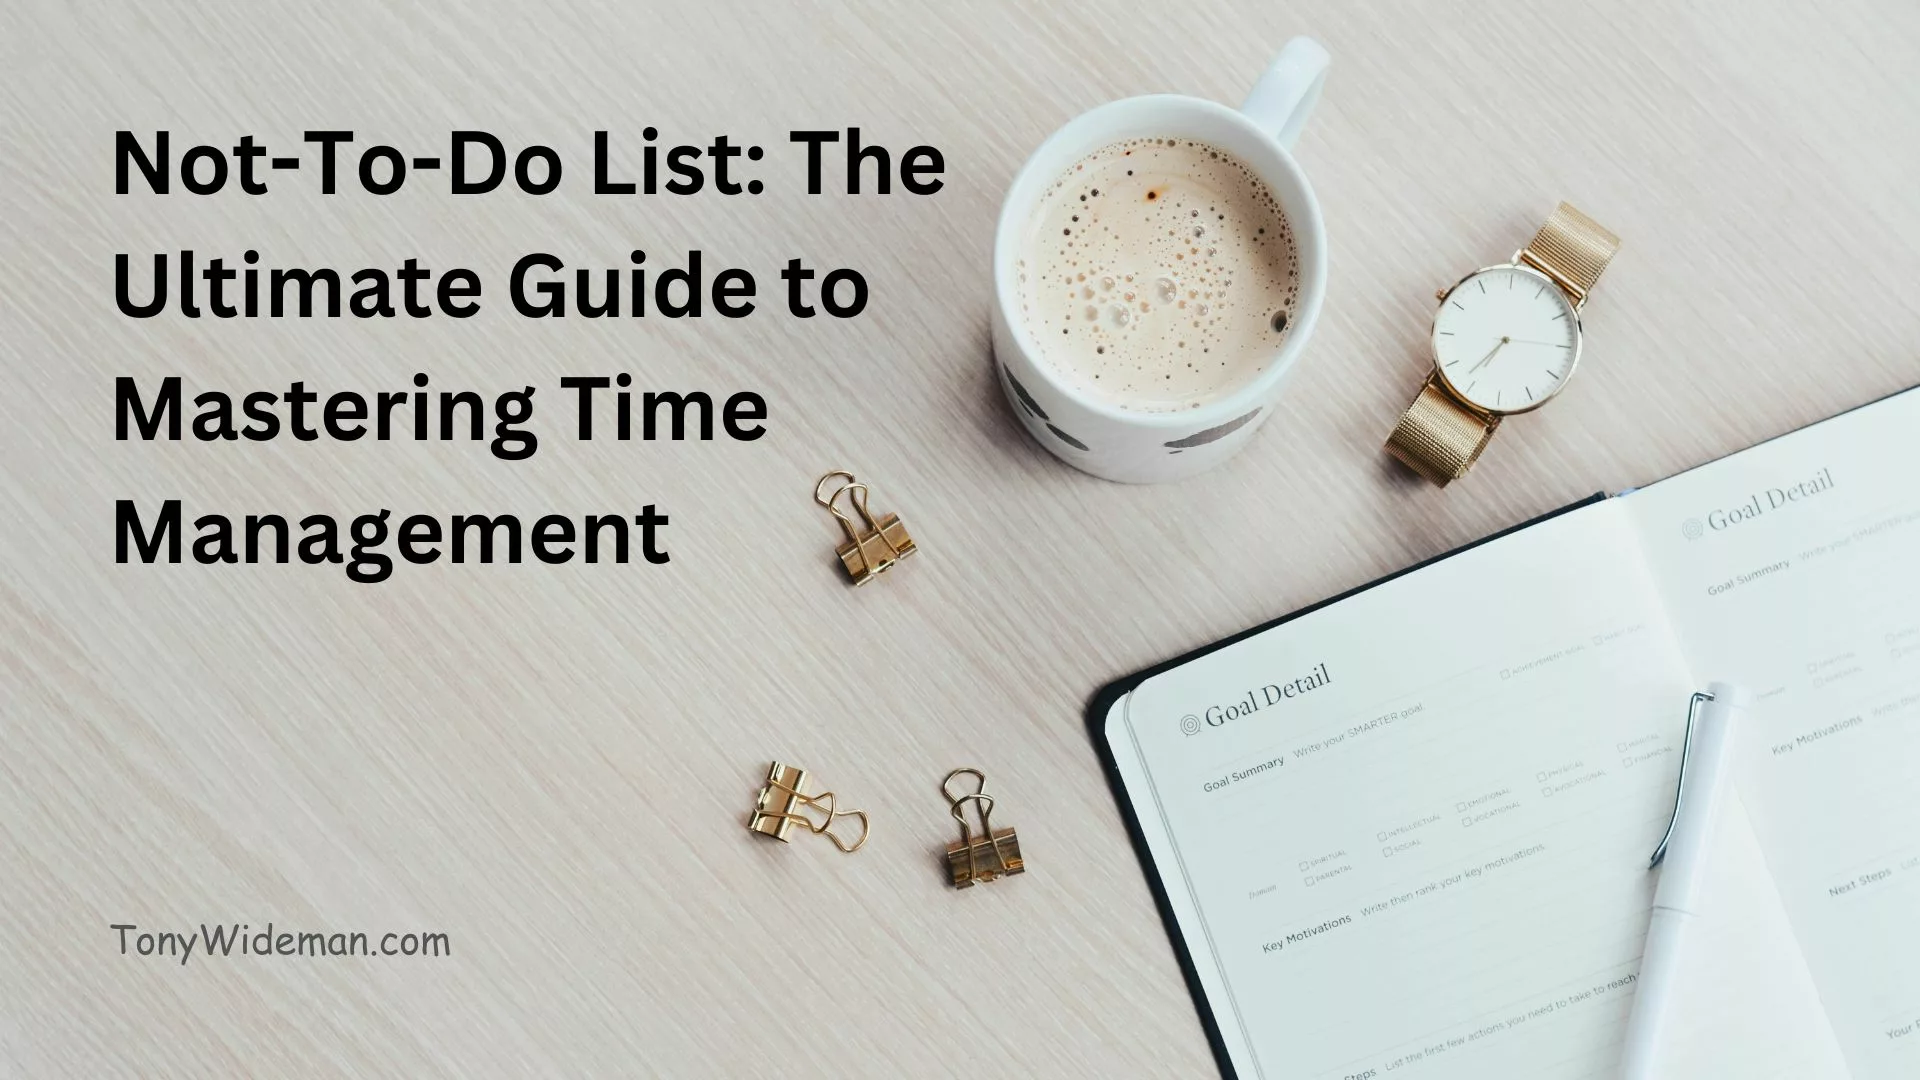 Not-To-Do List: The Ultimate Guide to Mastering Time Management